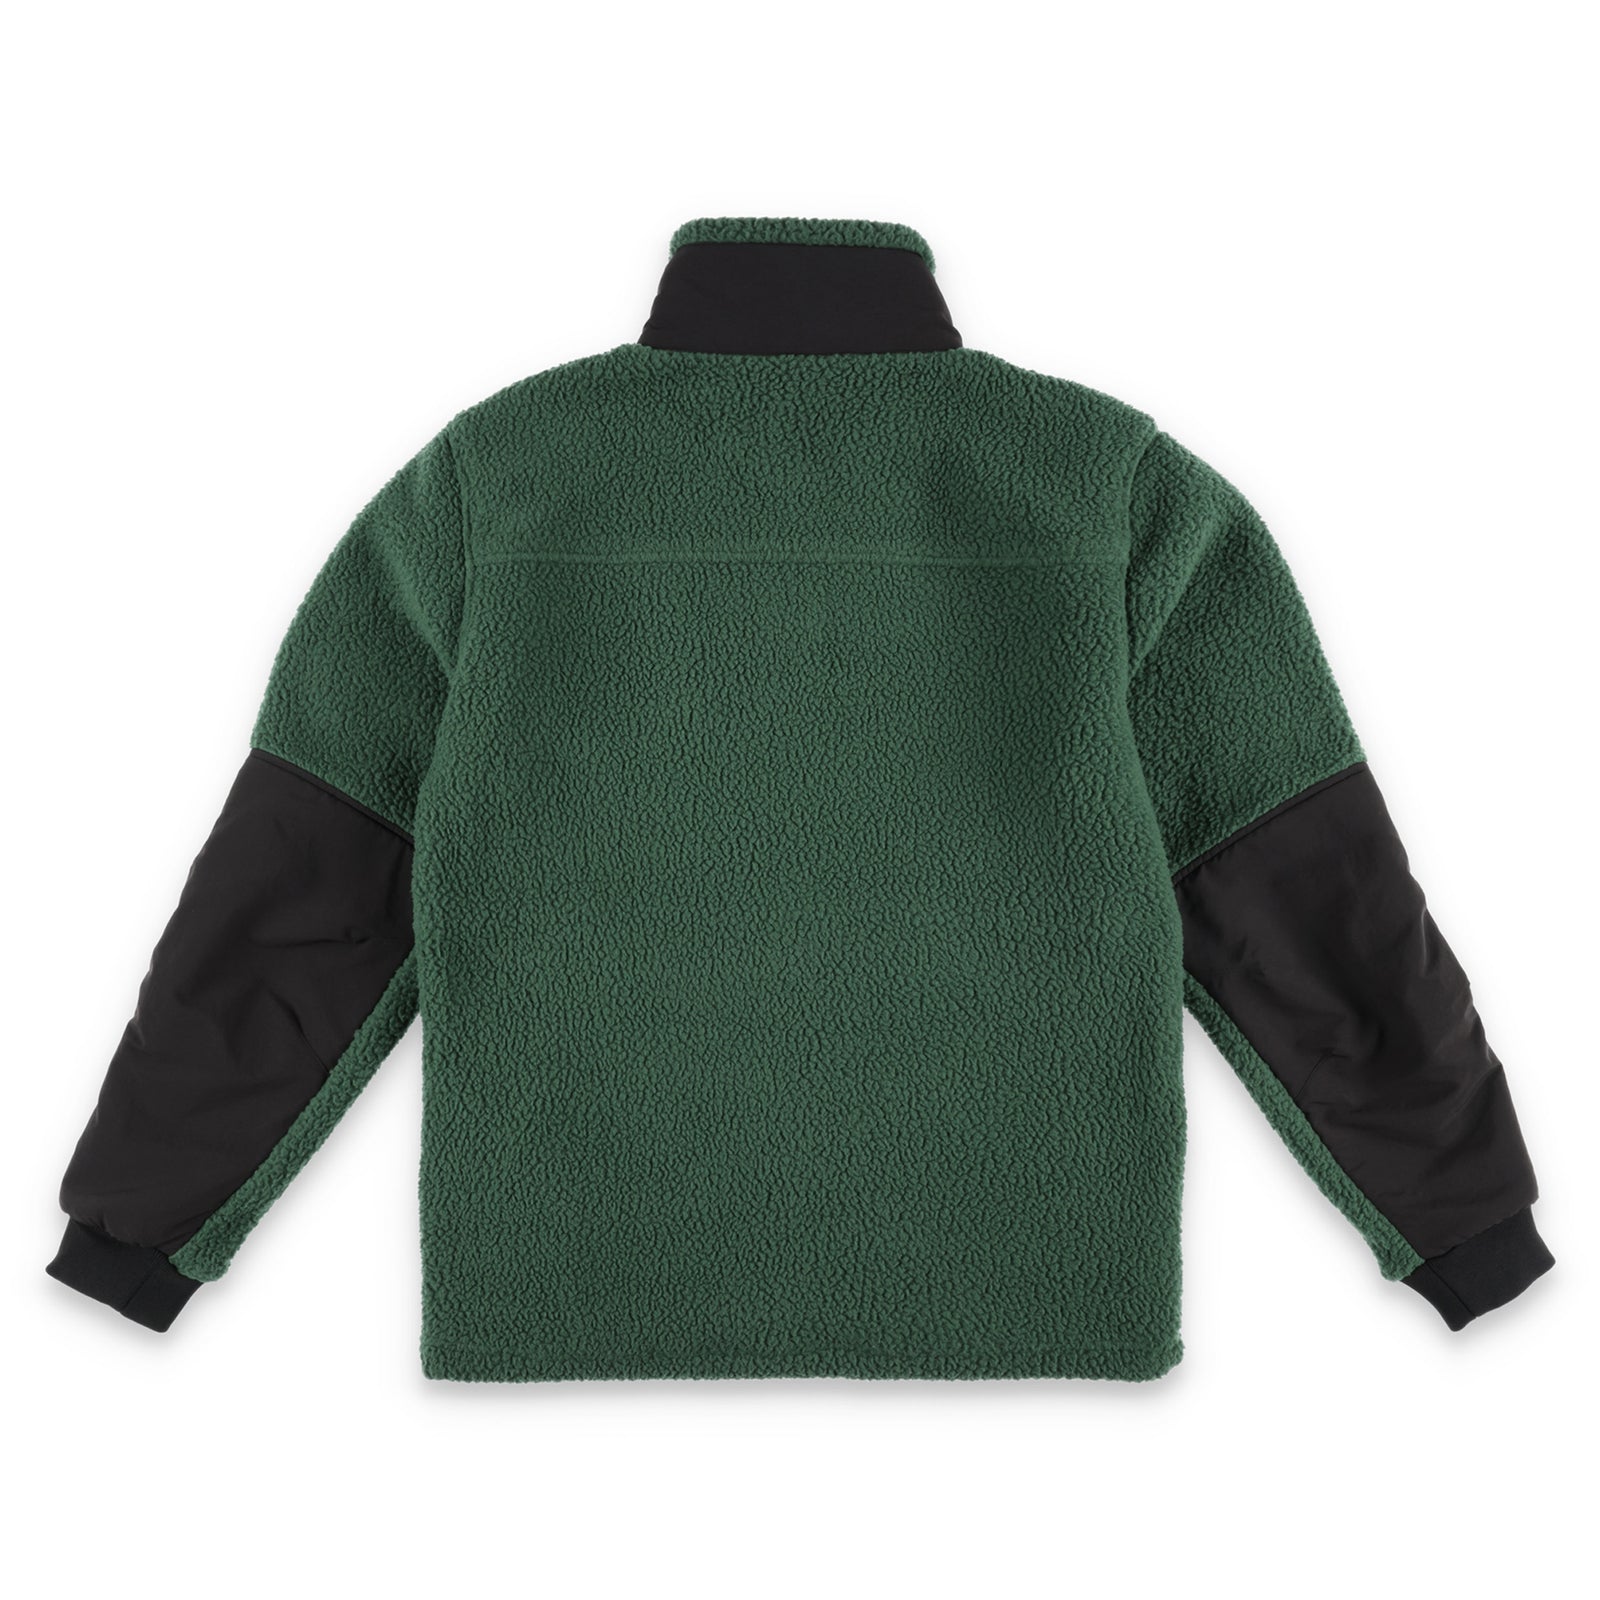 Back of Topo Designs Men's Mountain Fleece Pullover in "Forest" green.